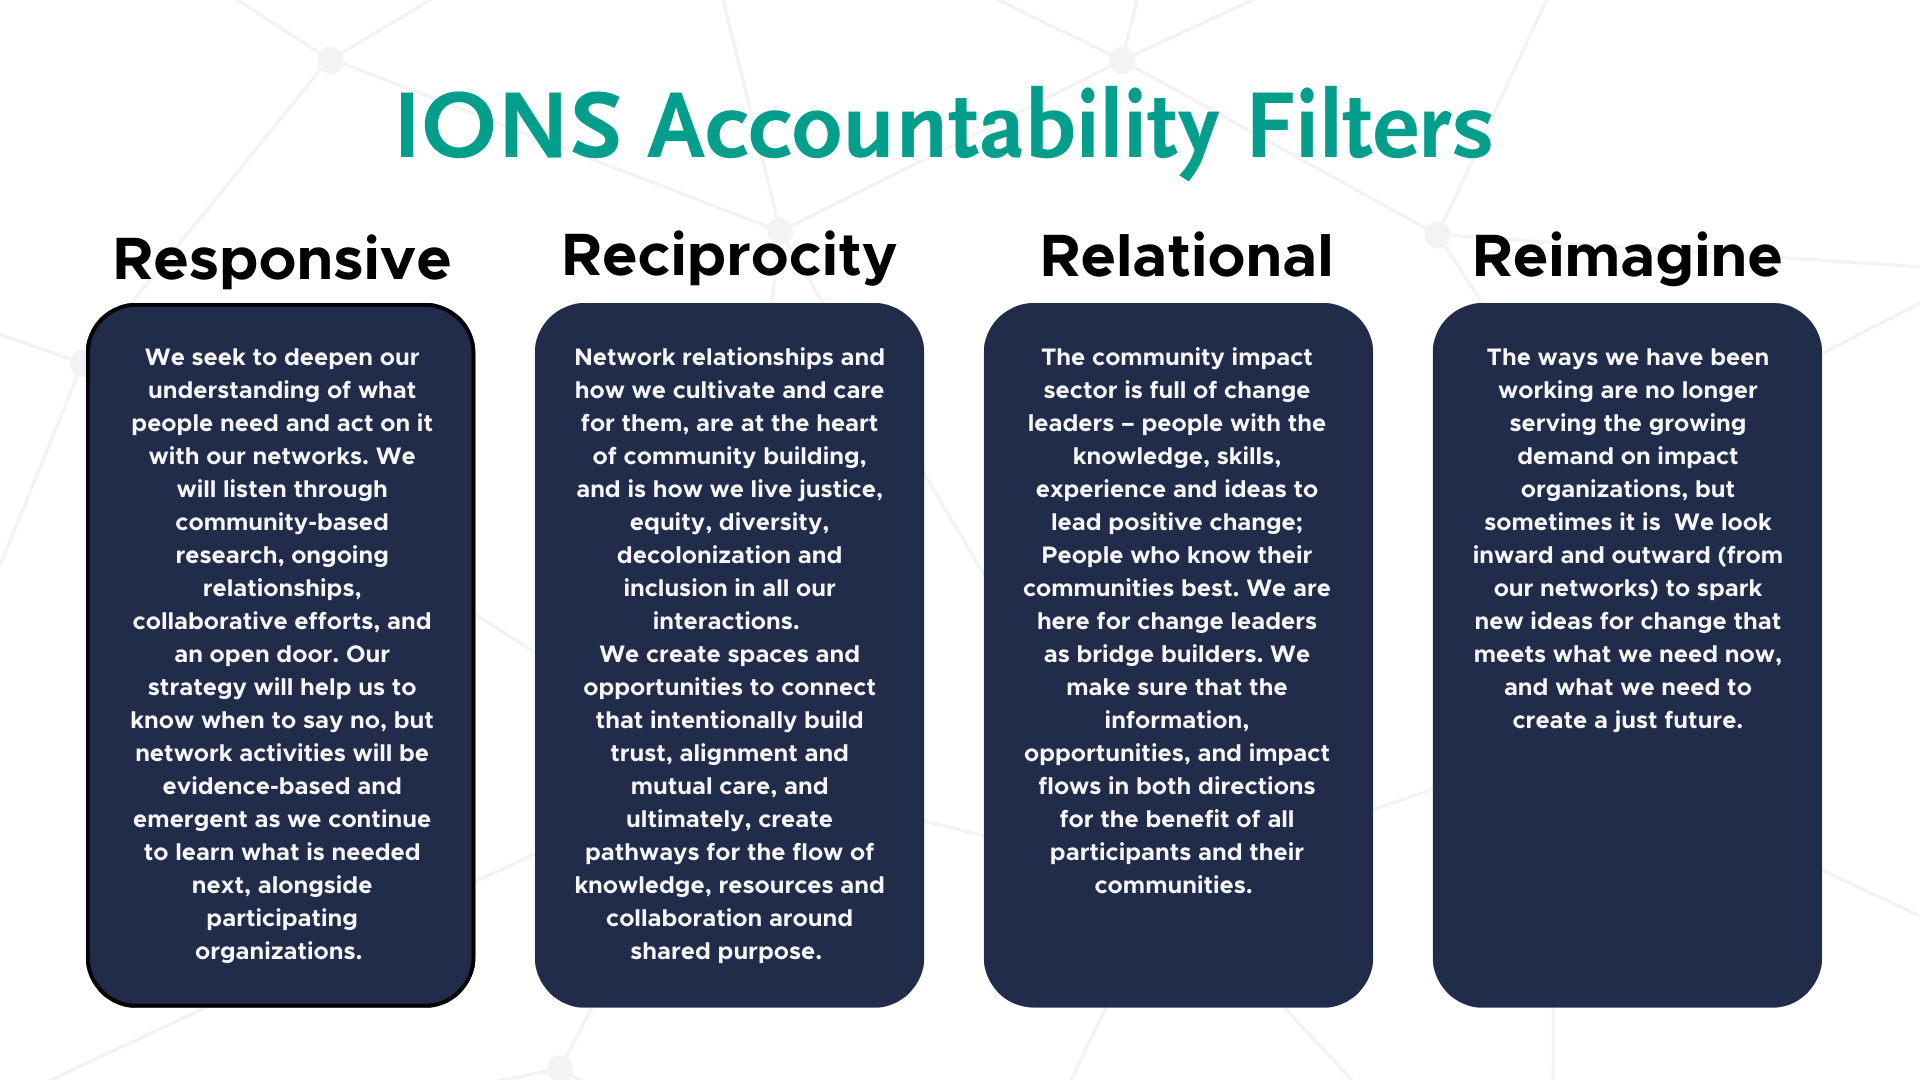 IONS Accountability Filters:</p>
<p>Responsive: We seek to deepen our understanding of what people need and act on it with our networks. We will listen through community-based research, ongoing relationships, collaborative efforts, and an open door. Our strategy will help us to know when to say no, but network activities will be evidence-based and emergent as we continue to learn what is needed next, alongside participating organizations.  </p>
<p>Reciprocity: Network relationships and how we cultivate and care for them, are at the heart of community building, and is how we live justice, equity, diversity, decolonization and inclusion in all our interactions.<br />
We create spaces and opportunities to connect that intentionally build trust, alignment and mutual care, and ultimately, create pathways for the flow of knowledge, resources and collaboration around shared purpose. </p>
<p>Relational: The community impact sector is full of change leaders – people with the knowledge, skills, experience and ideas to lead positive change; People who know their communities best. We are here for change leaders as bridge builders. We make sure that the information, opportunities, and impact flows in both directions for the benefit of all participants and their communities.  </p>
<p>Reimagine: The ways we have been working are no longer serving the growing demand on impact organizations, but sometimes it is  We look inward and outward (from our networks) to spark new ideas for change that meets what we need now, and what we need to create a just future. 